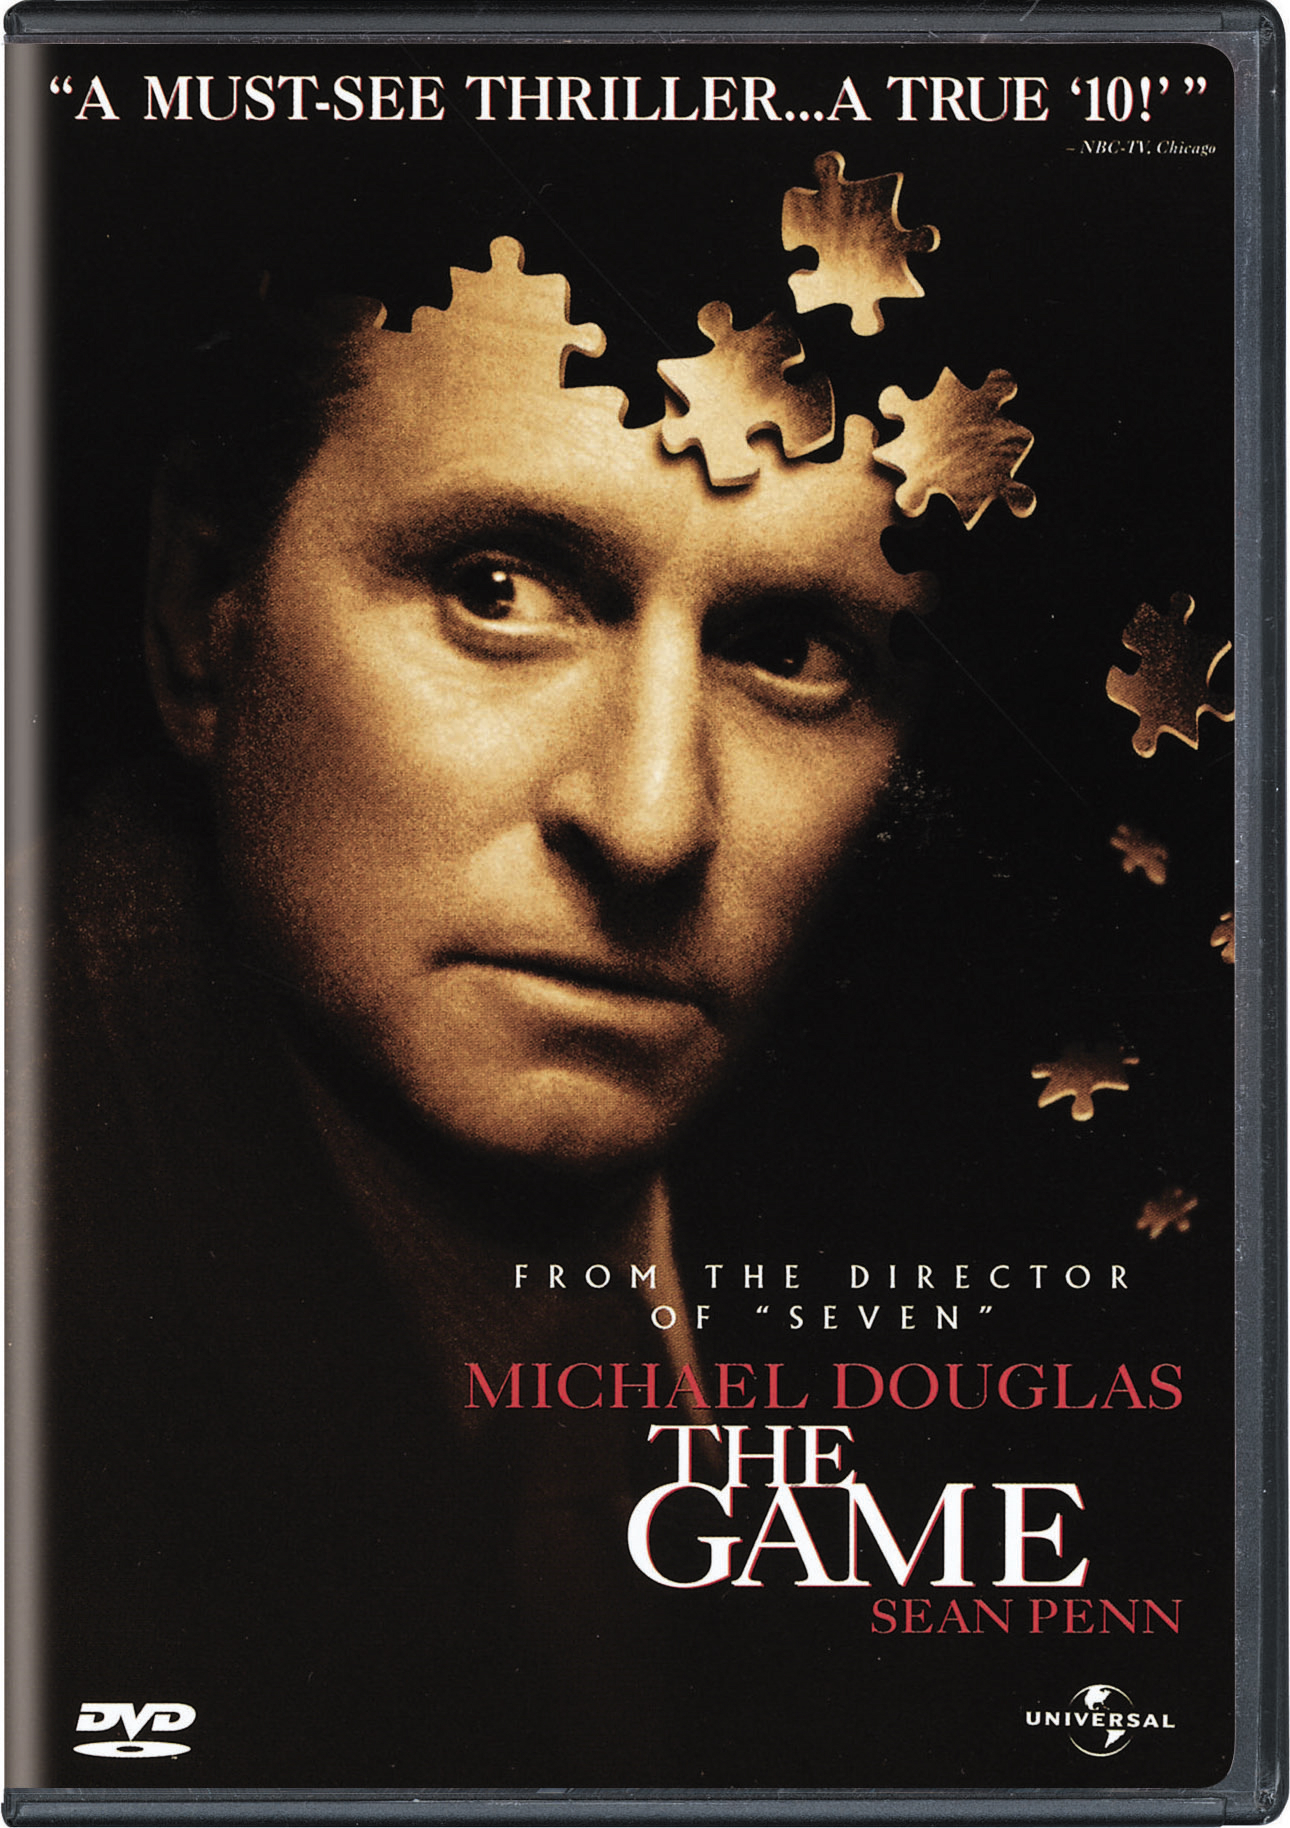 The Game - DVD [ 1997 ]  - Thriller Movies On DVD - Movies On GRUV